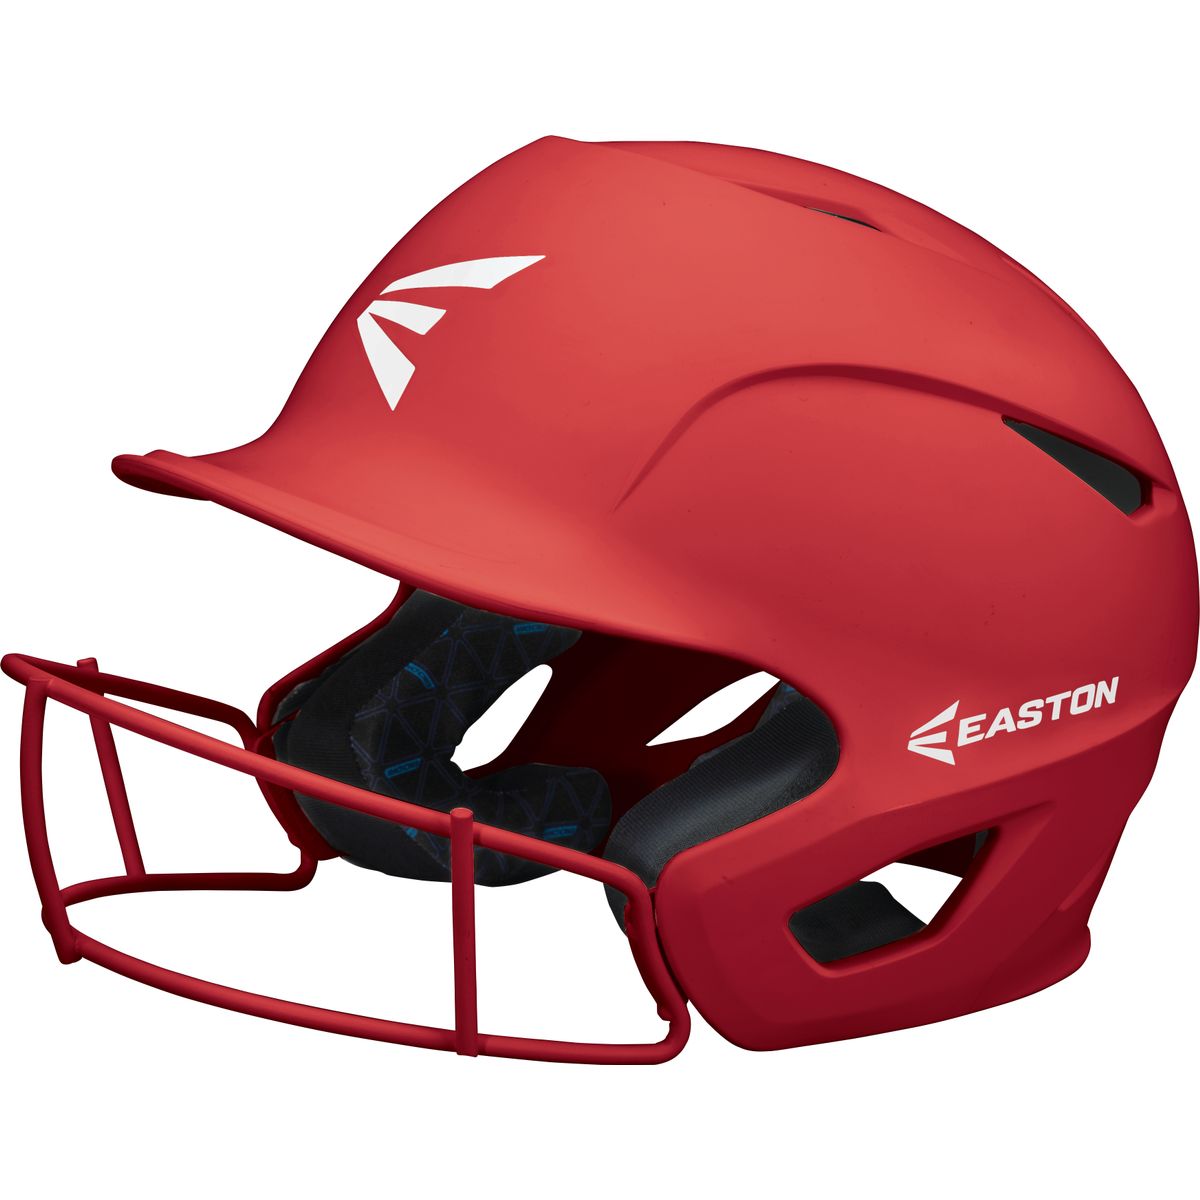 Easton Prowess Grip Fastpitch Softball Helmet with Mask